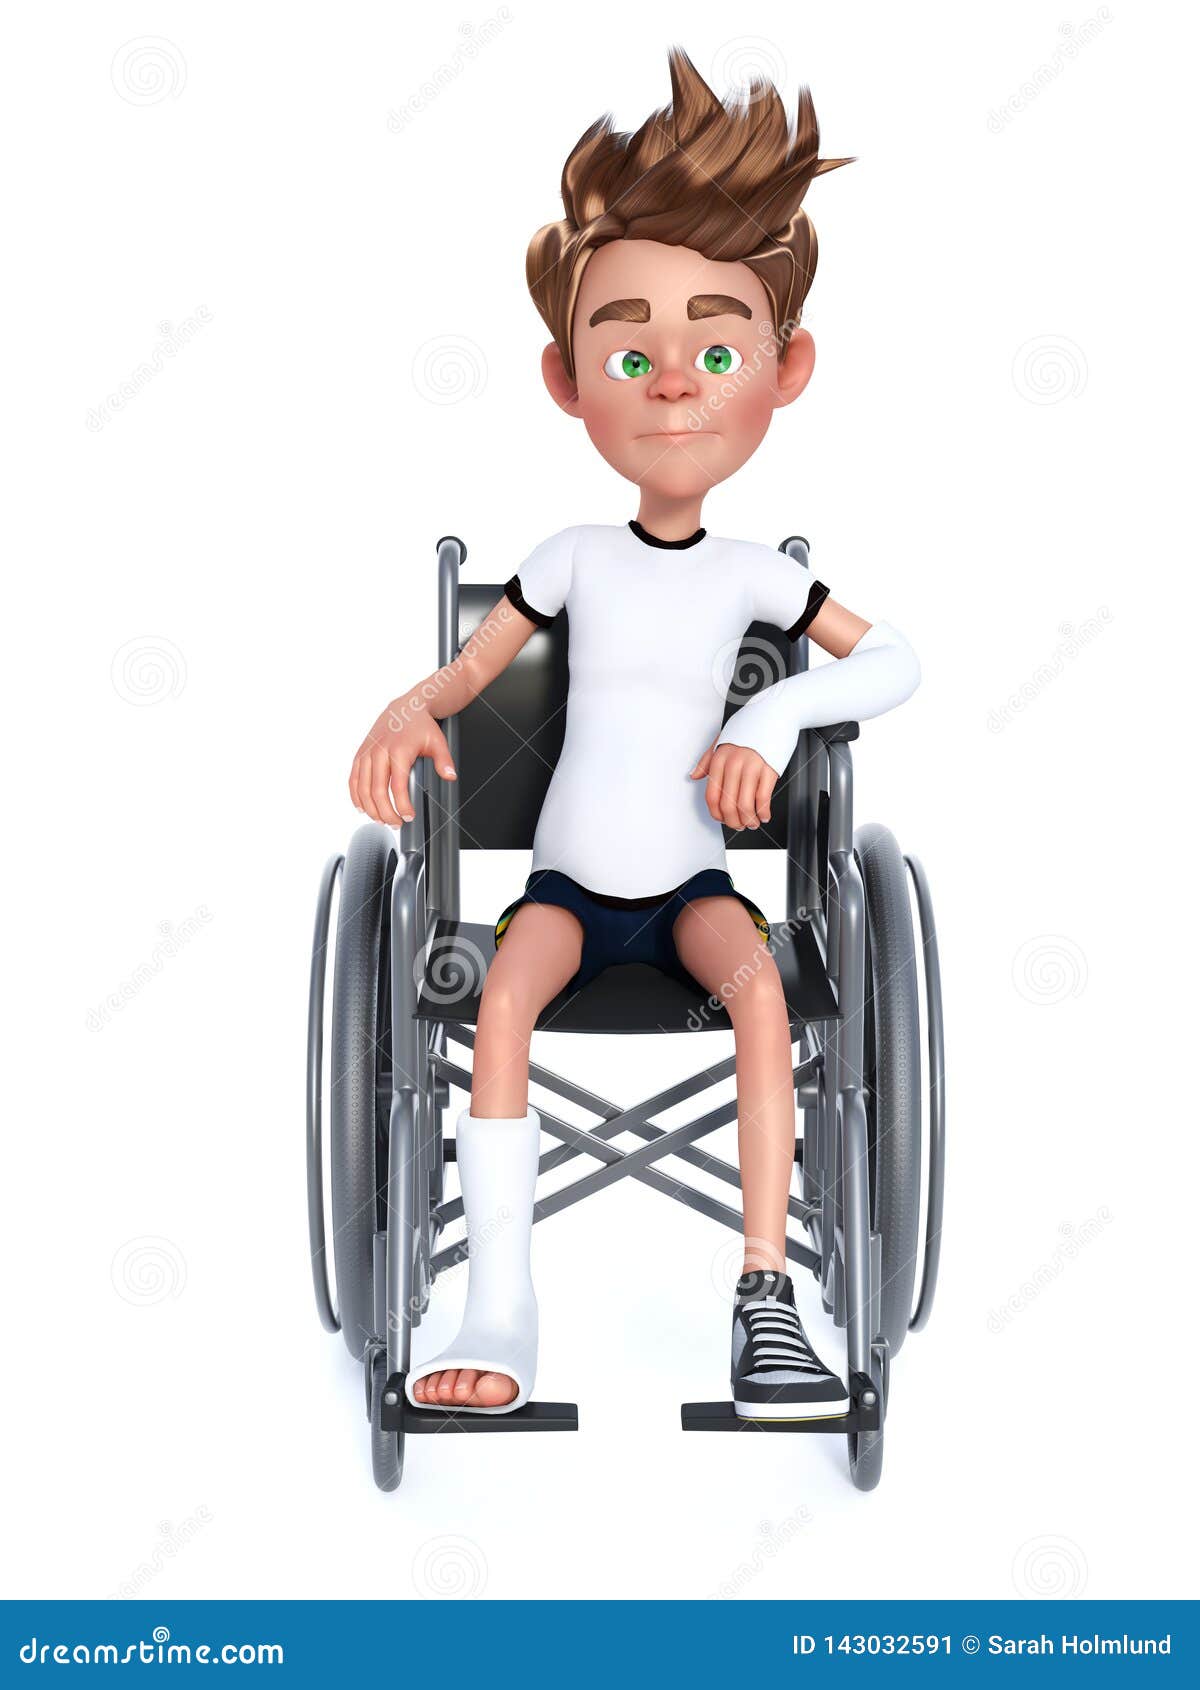 3D Rendering of a Cartoon Boy Sitting in a Wheelchair Stock